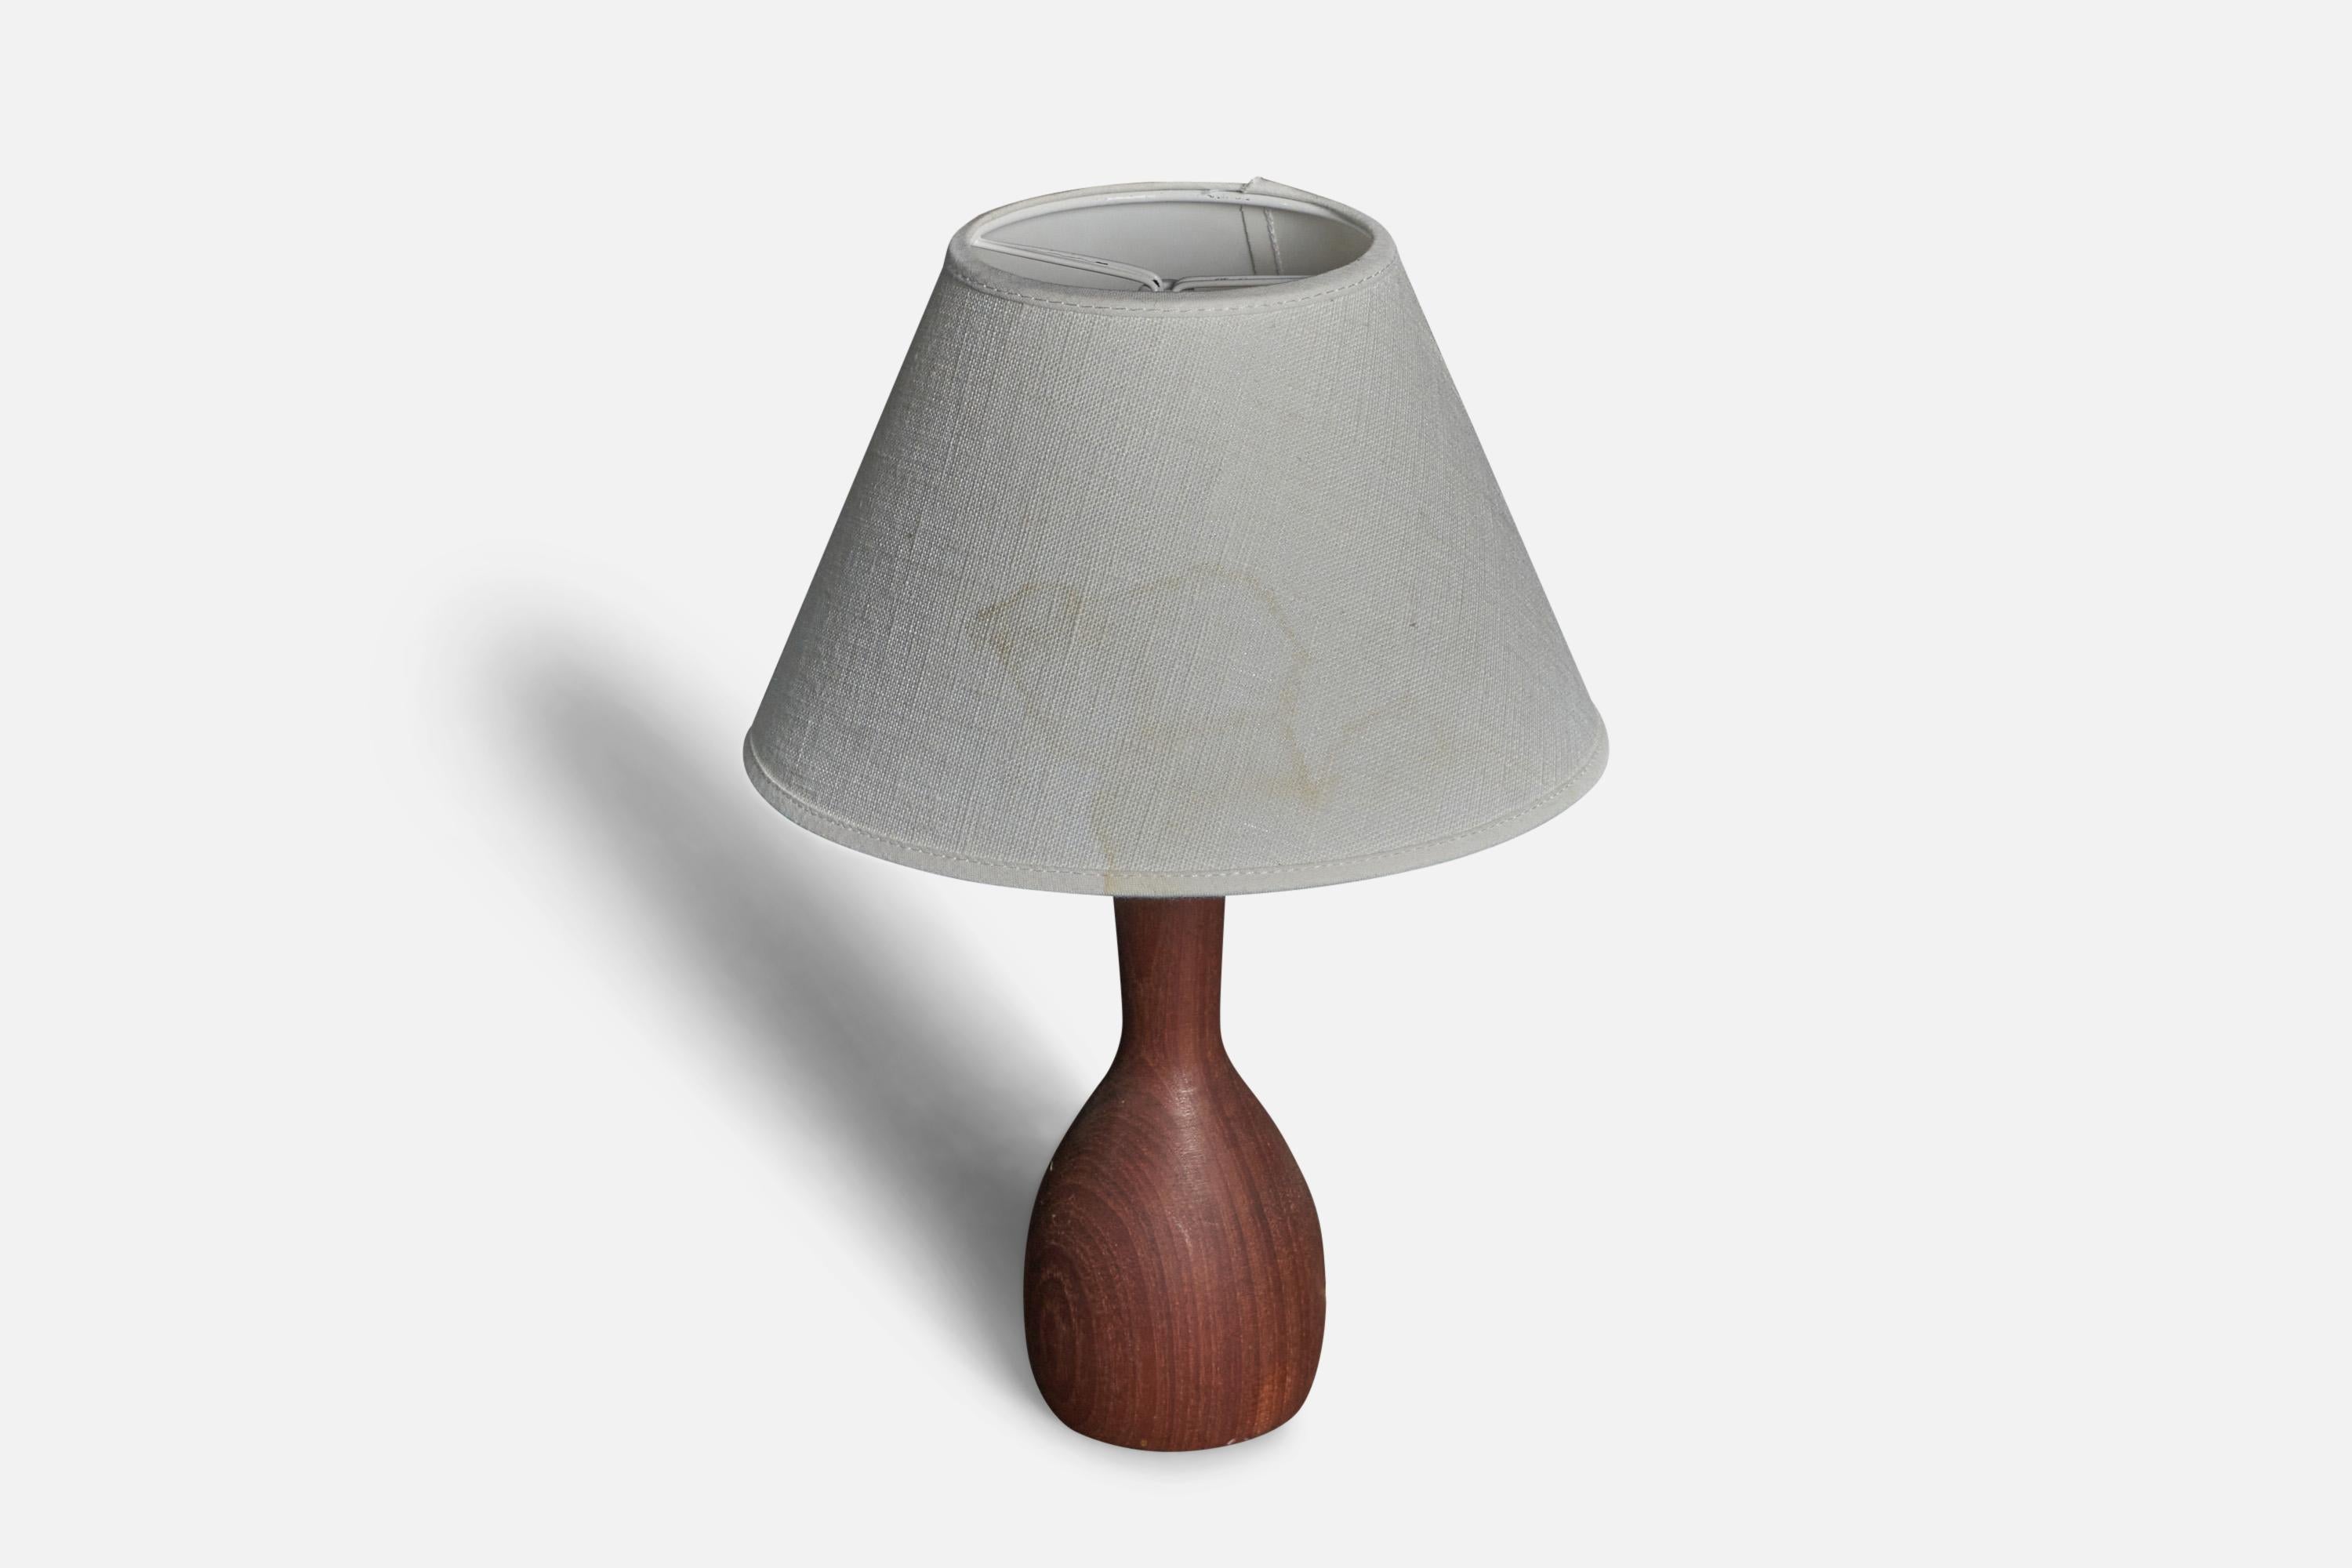 An organic table lamp. In solid teak. Lampshade not included.

Other designers of the period include Finn Juhl, Hans Wegner, Kaare Klint, Alvar Aalto, and Paavo Tynell.